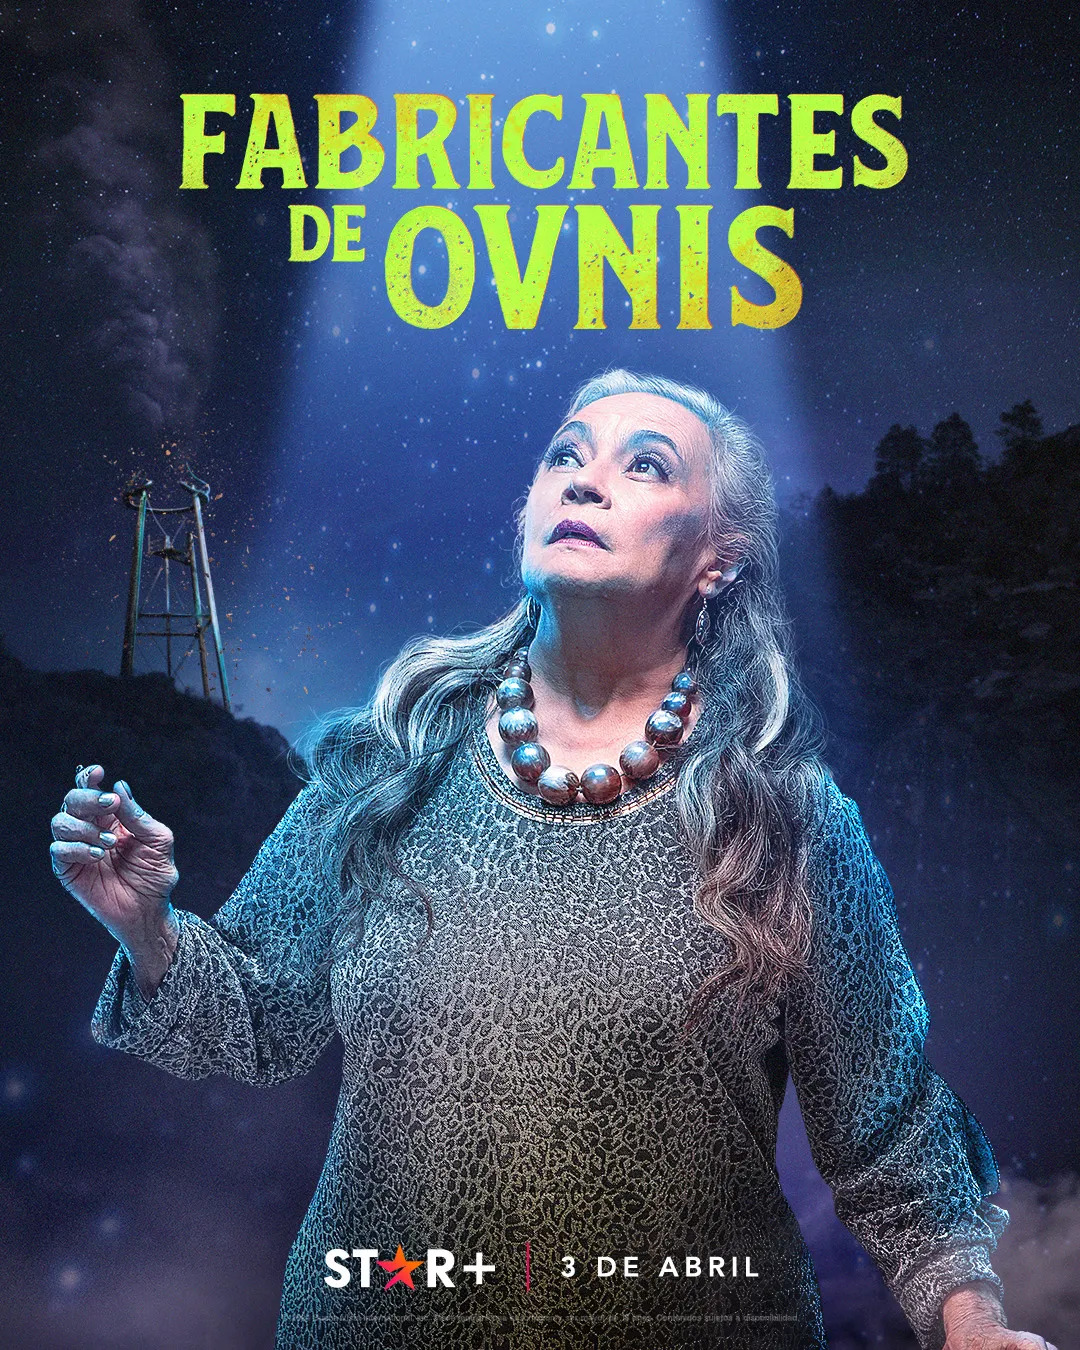 Extra Large TV Poster Image for Fabricante de ovnis (#6 of 11)